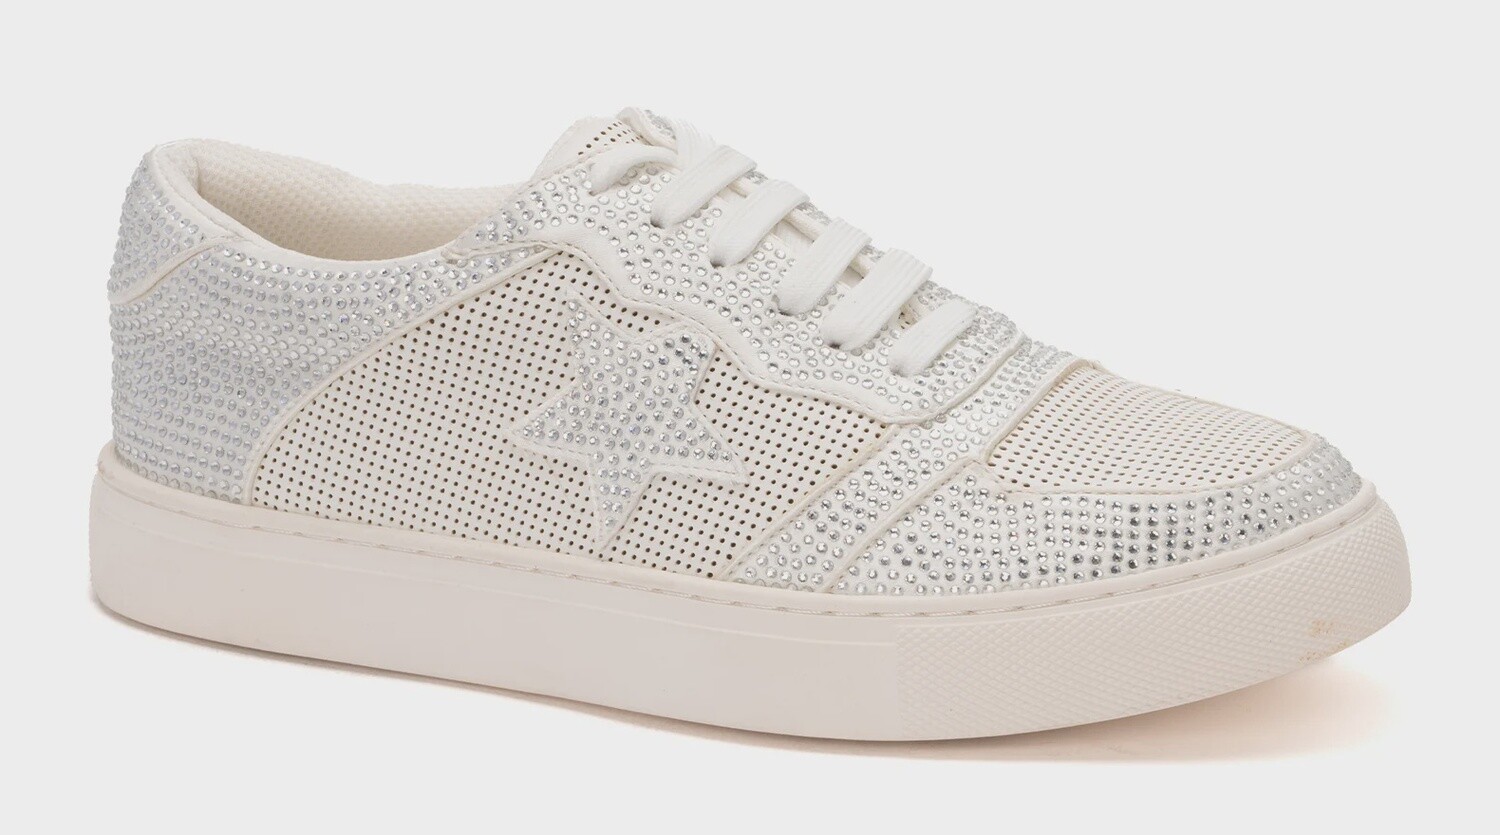 Corky's White Crystals Legendary Sneakers